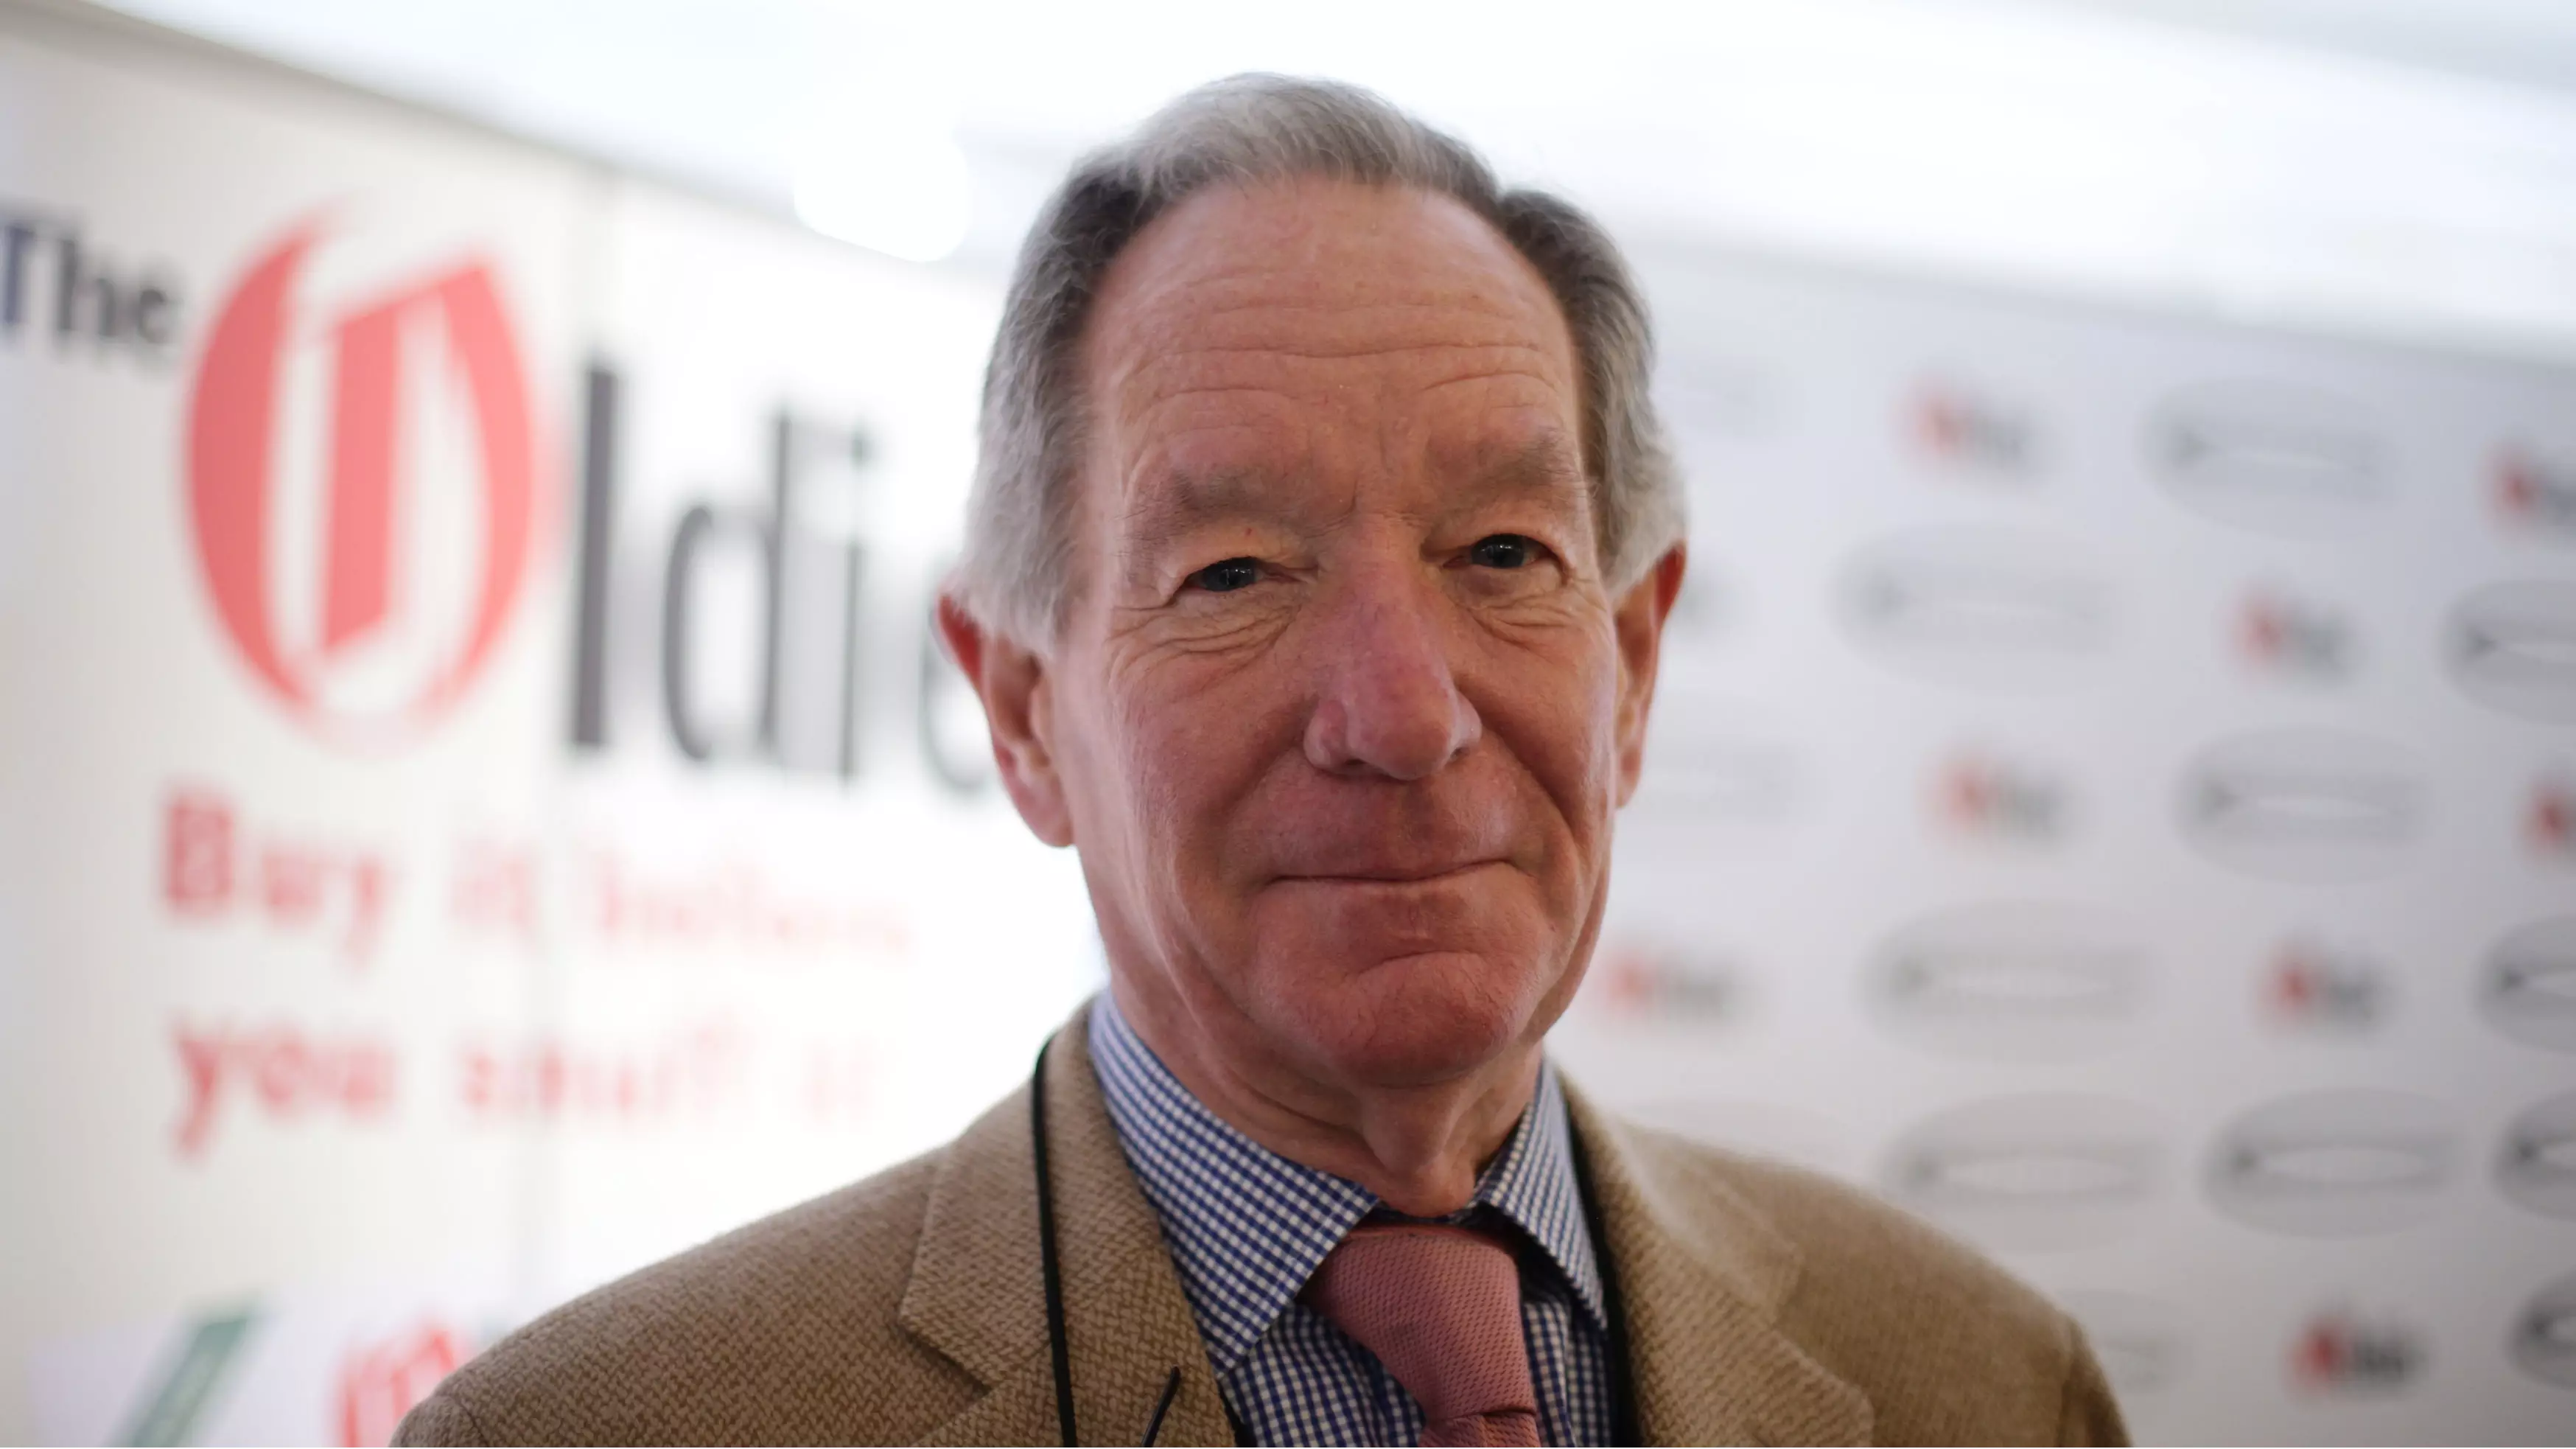 Let Fat People Die Early To Save The NHS Says Michael Buerk